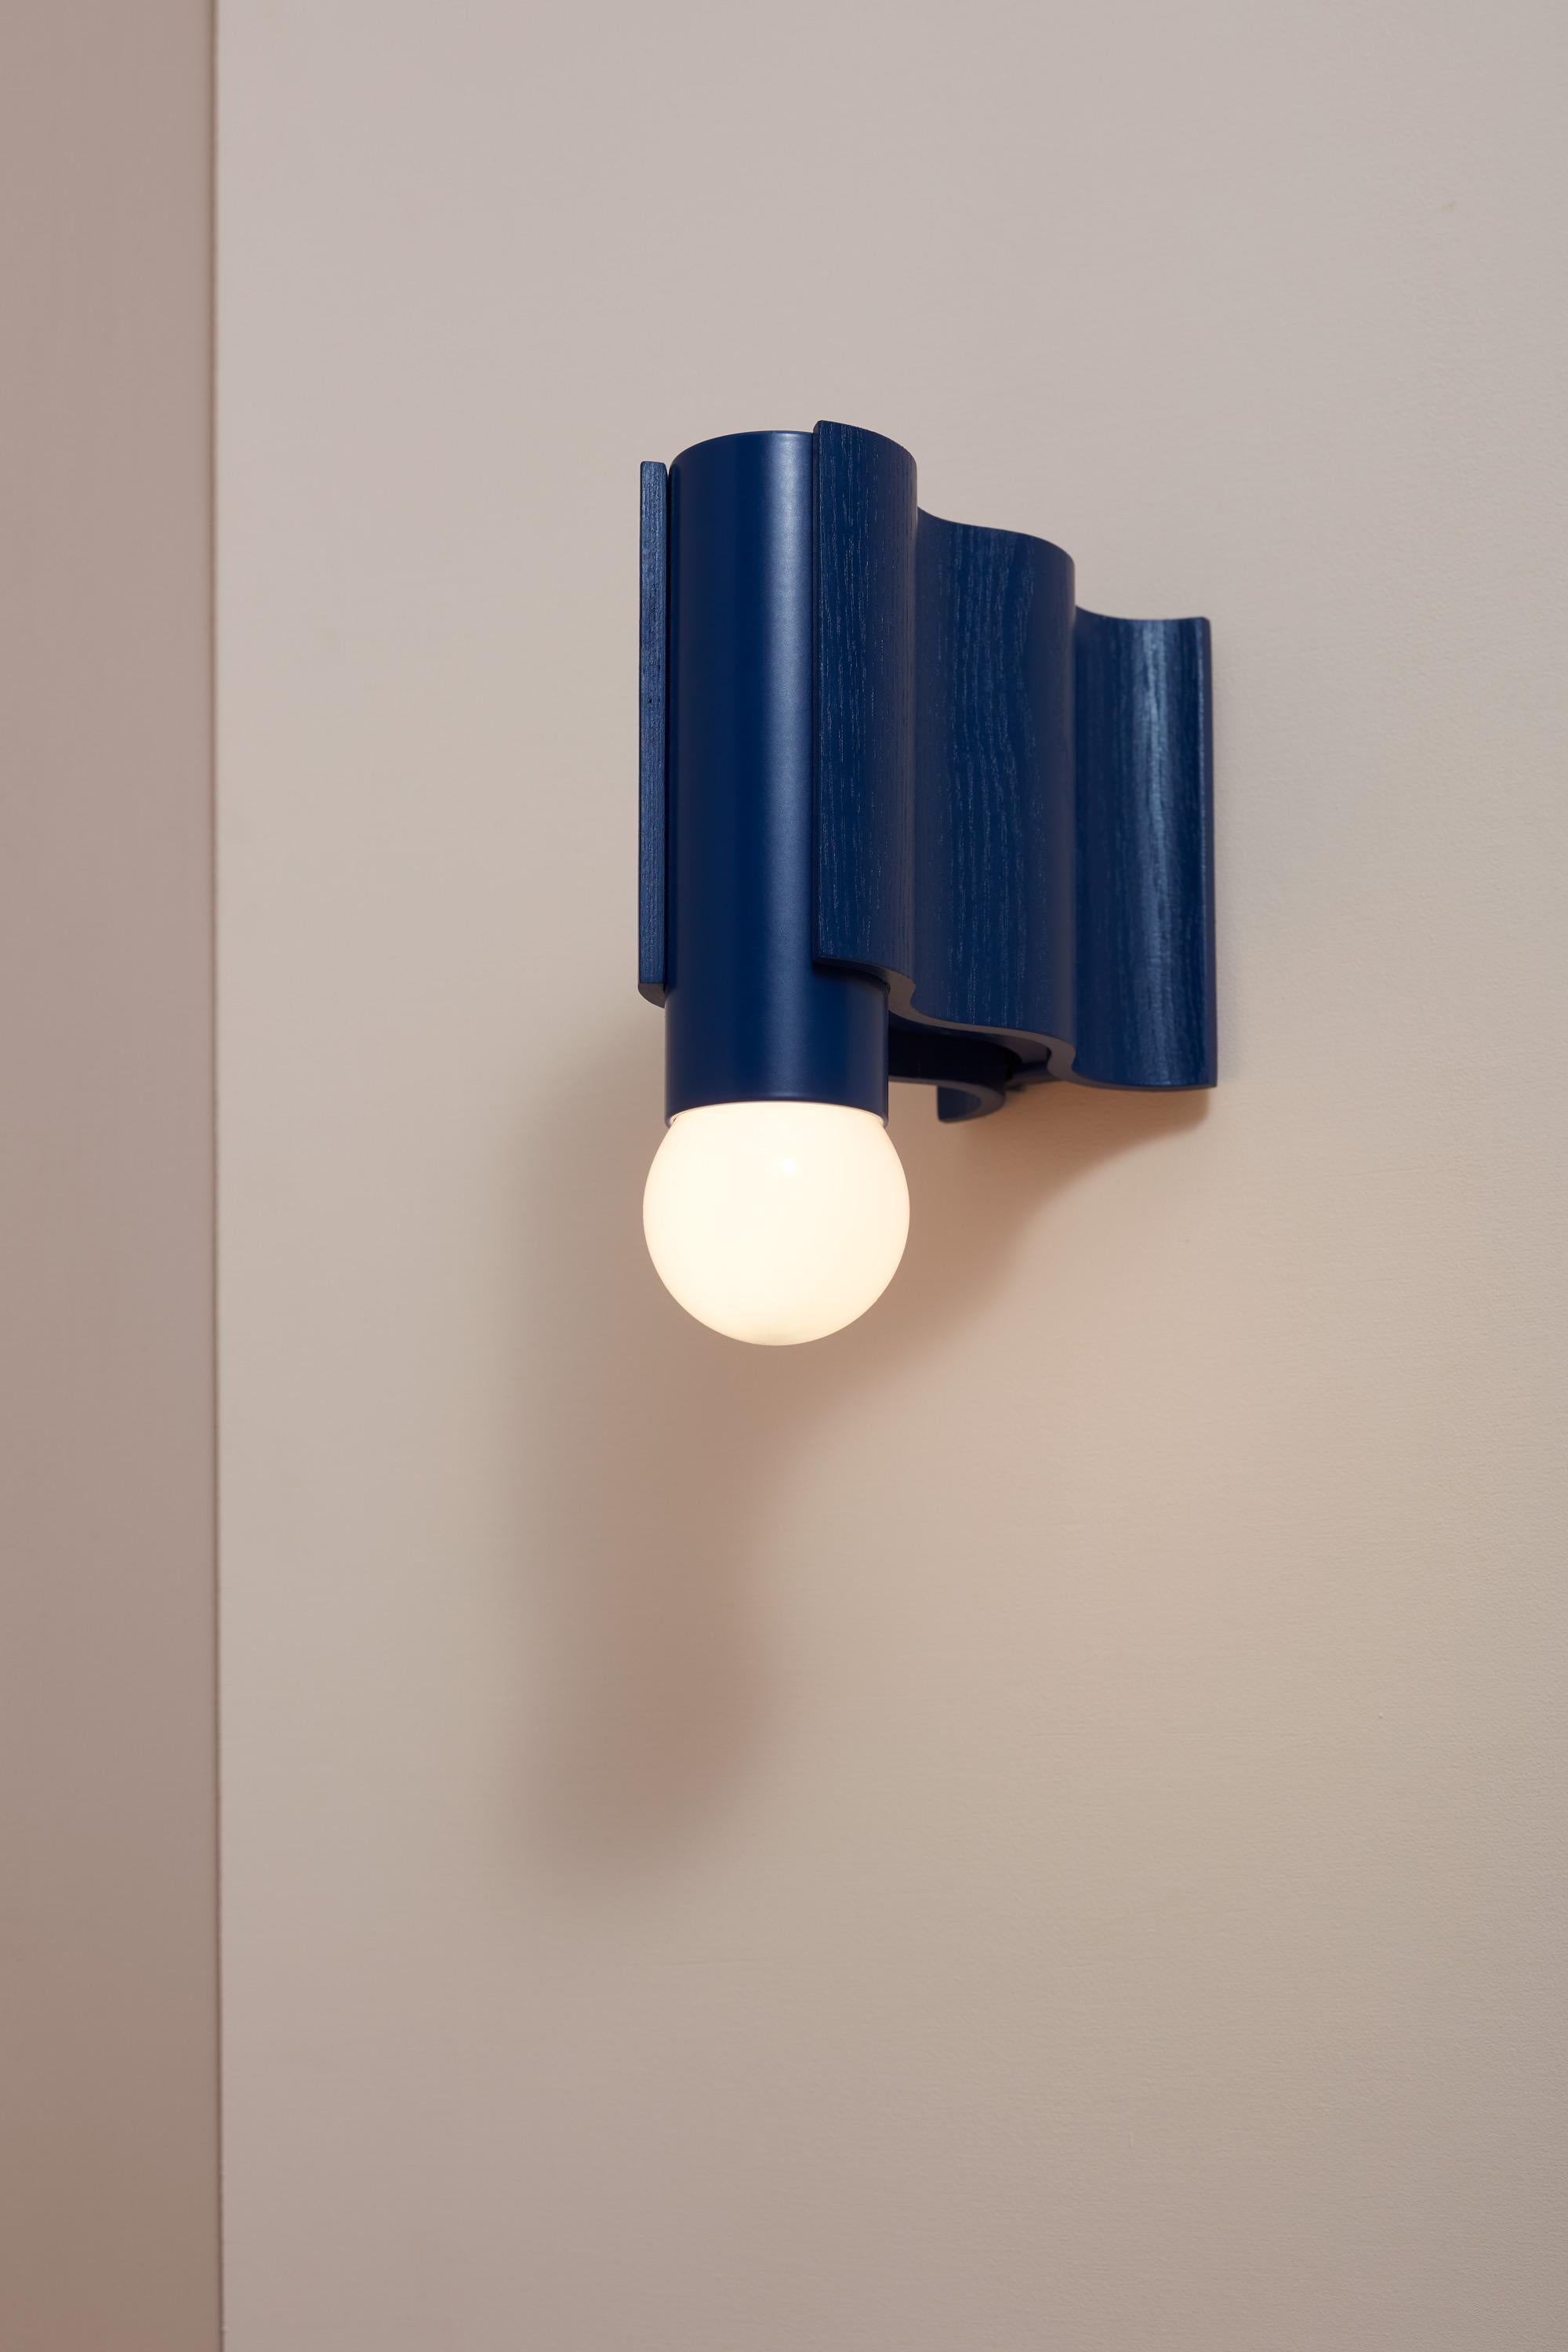 Short single sconce made from sapphire blue painted ash veneered plywood and sapphire blue powder-coated aluminium tube.

Technical information:
- Comes with dimmable bulb (Class A60, 8W, 720 Lumen, 3000° Kelvin, A+ energy rating, Ra > 80)
- Can